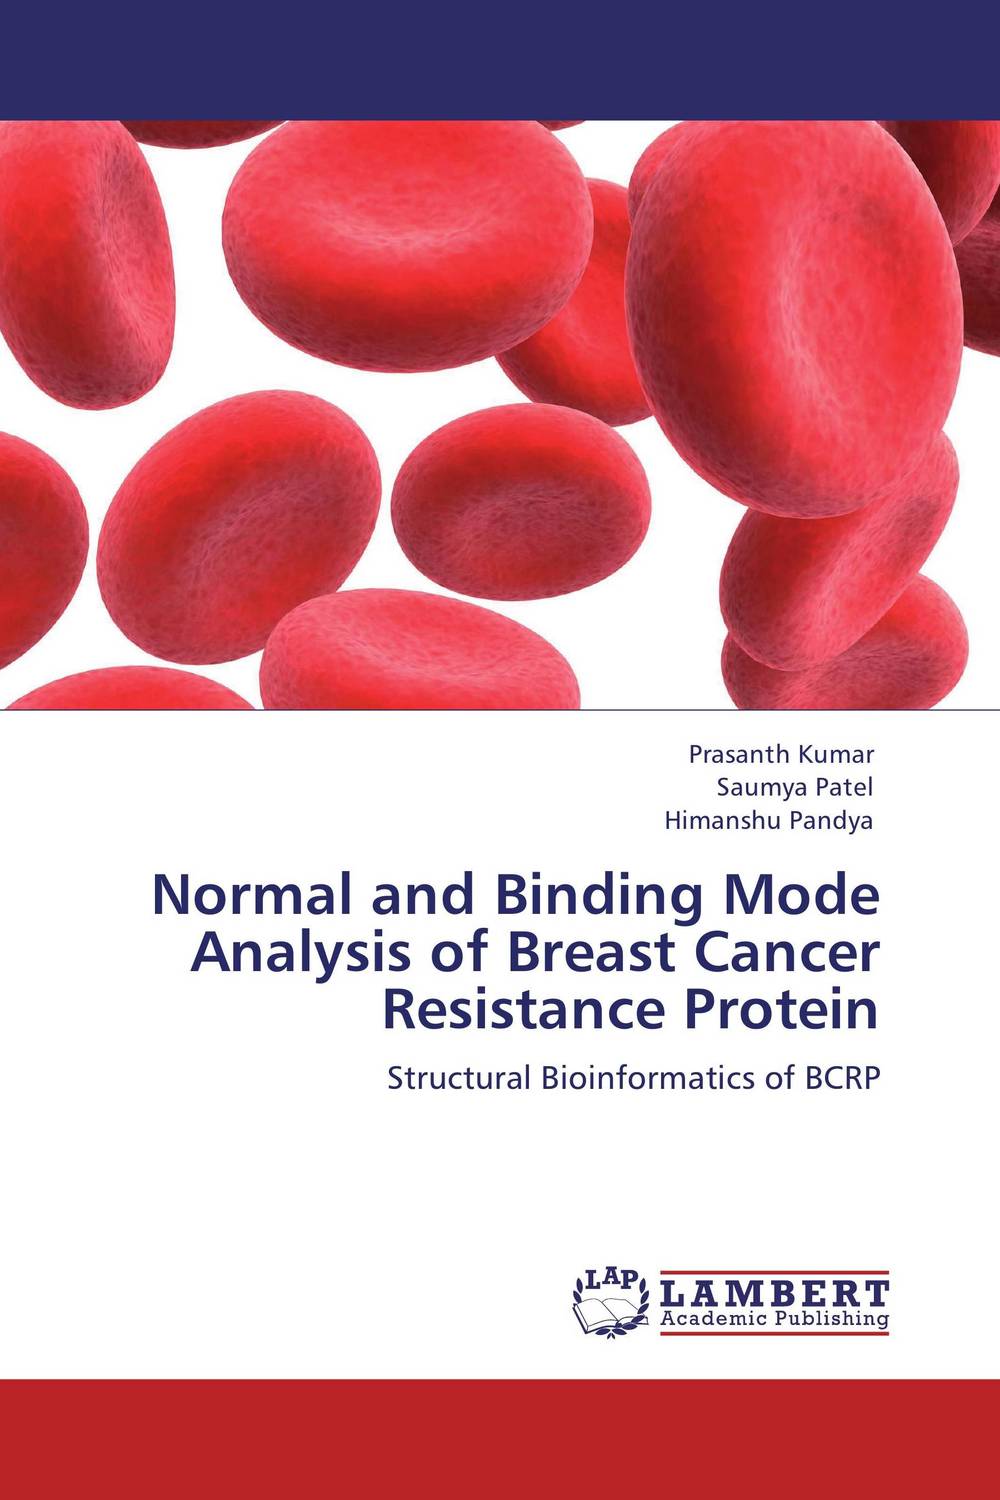 Normal and Binding Mode Analysis of Breast Cancer Resistance Protein